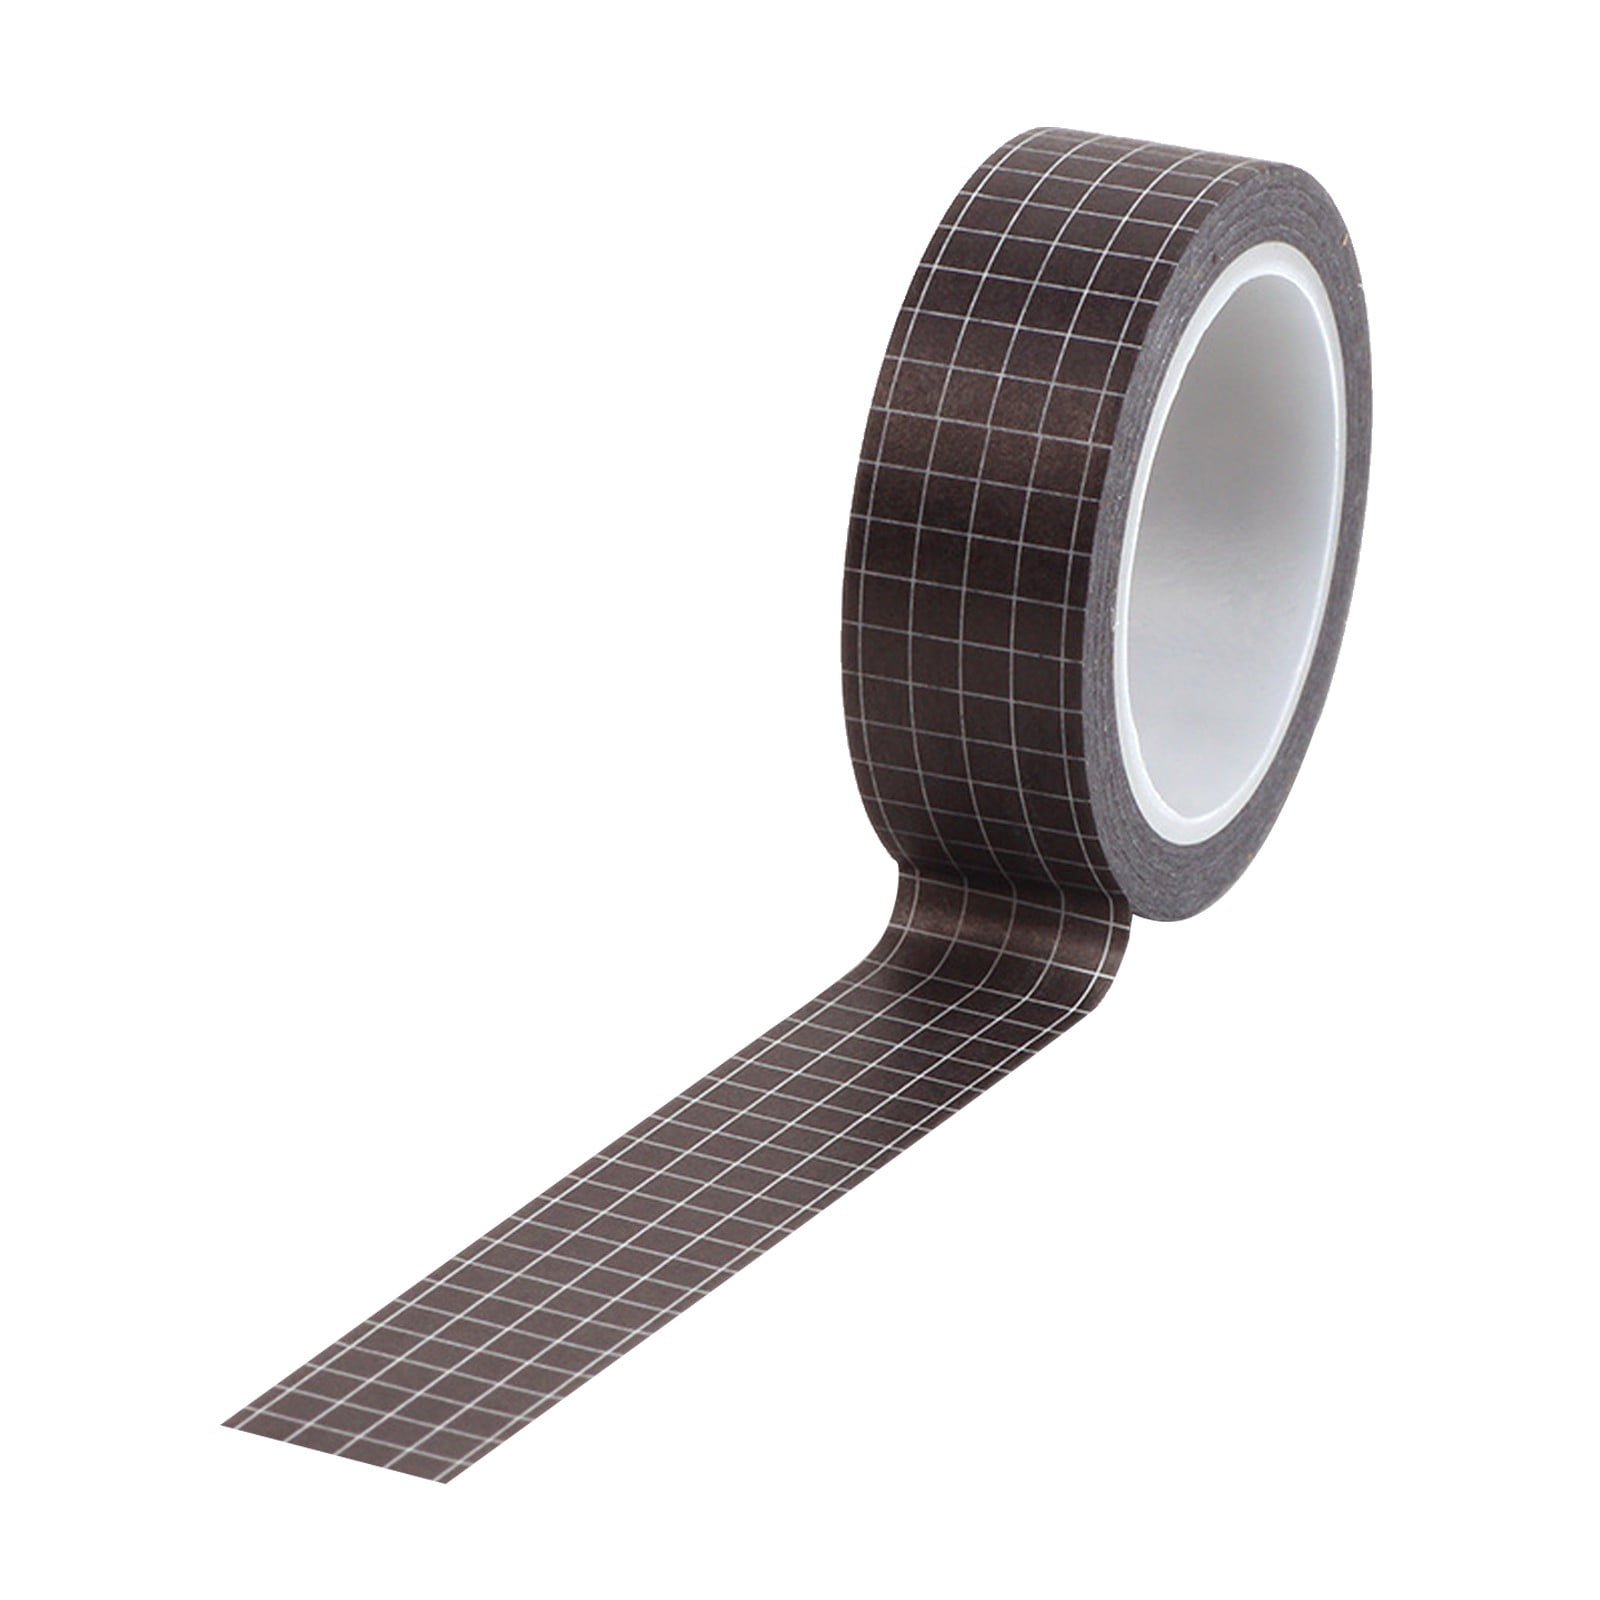 Clearance Sale! Ttybhh Adhesive Tape, Grid Paper Tape Decorative ...